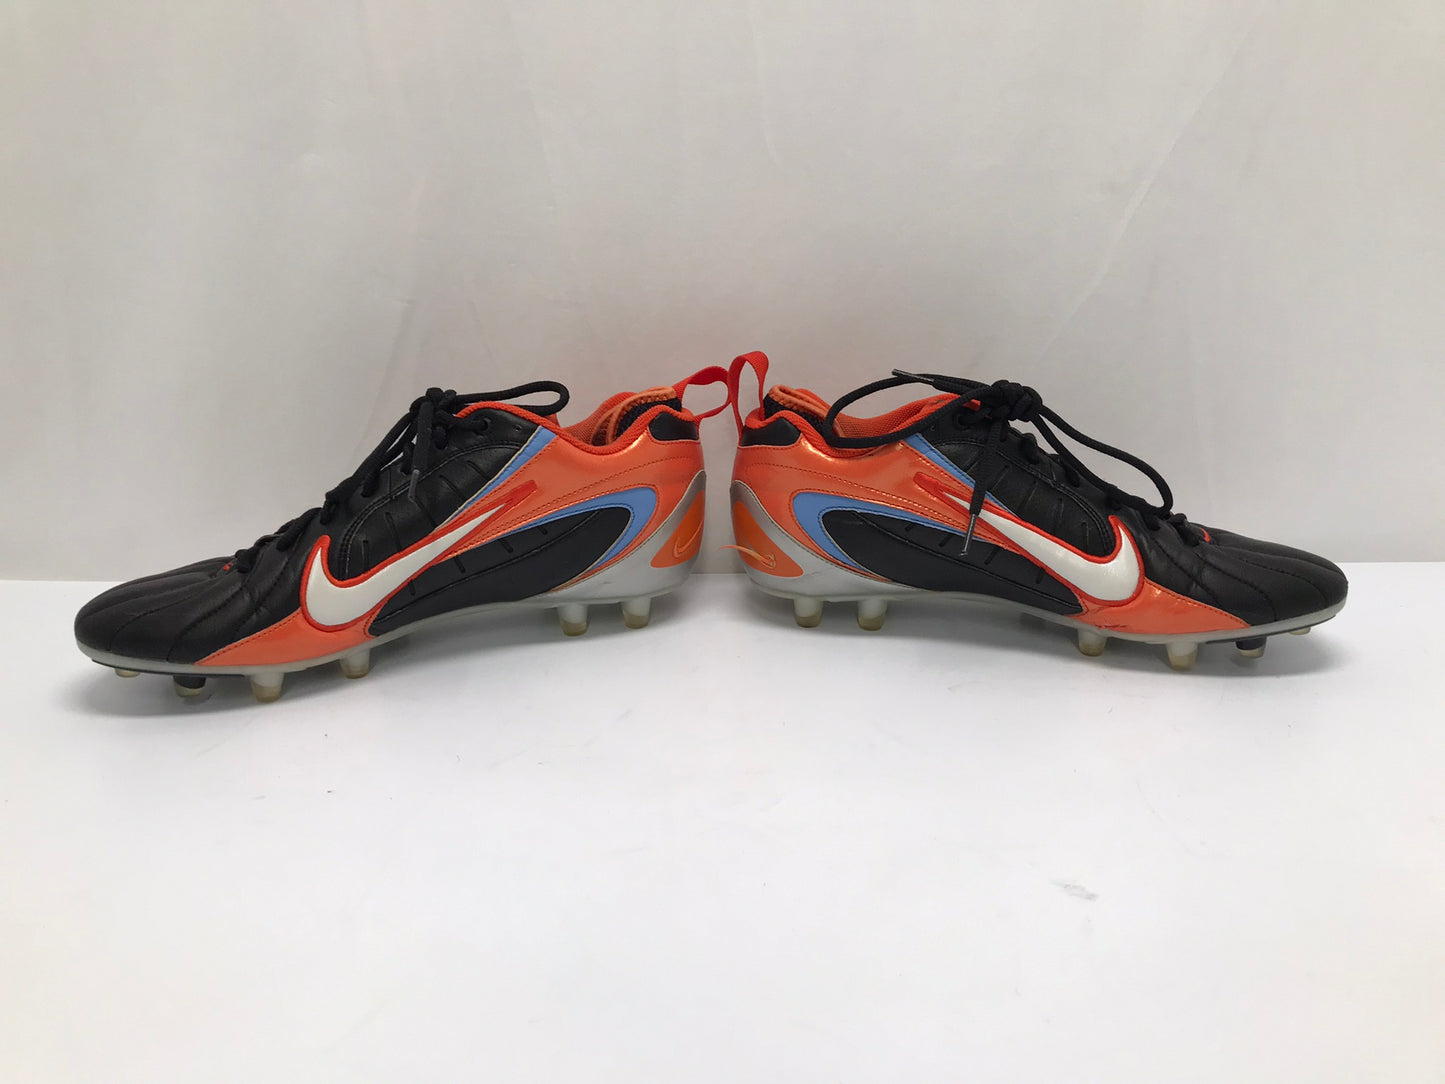 Football Cleats Men's Size 12 Nike iD Pro Quality Leather Black Orange As New